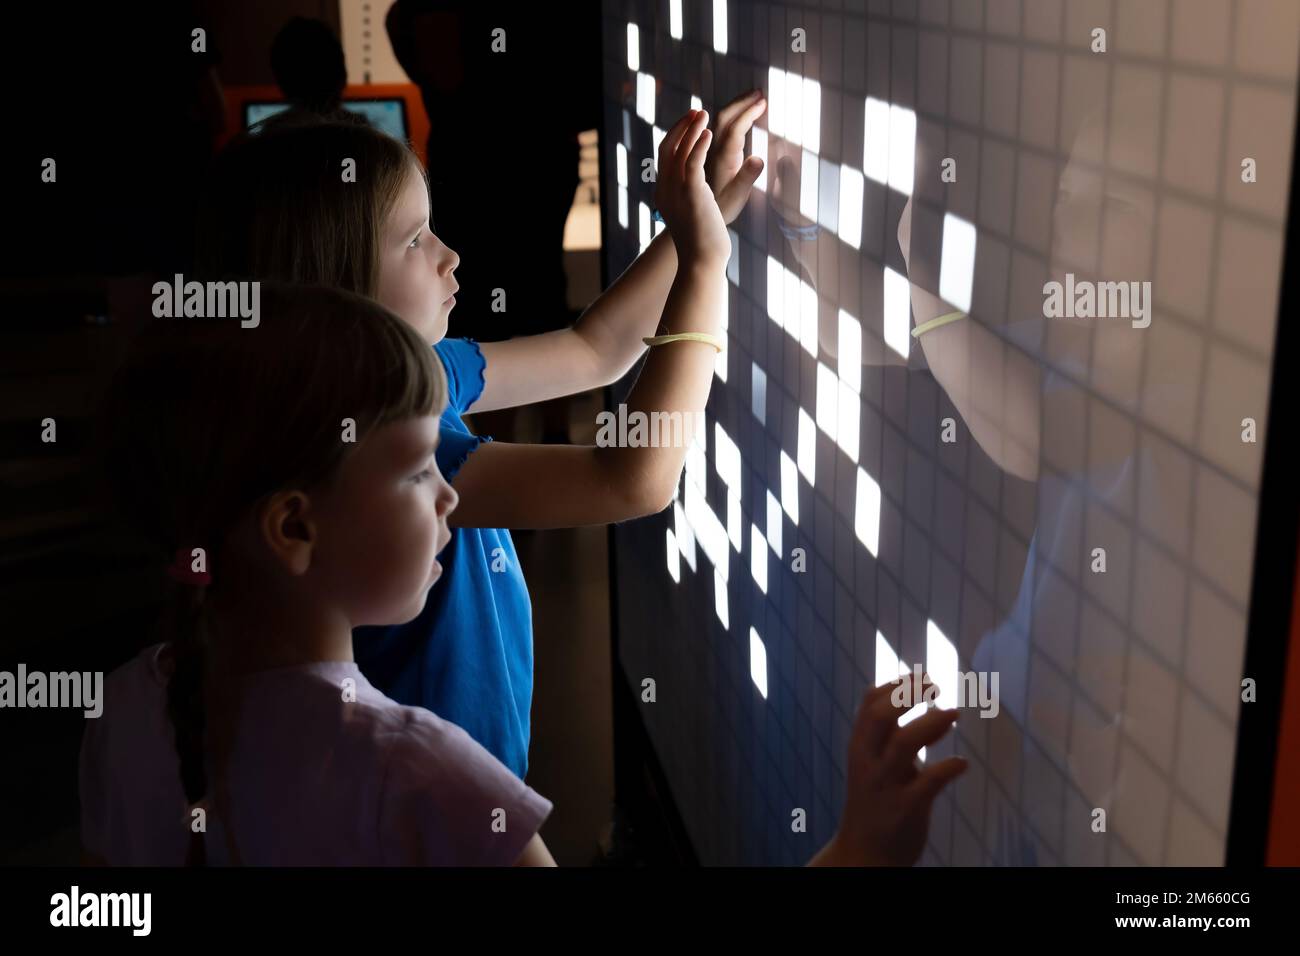 Two young elementary school age children, girls using an interactive touchscreen interface together, kids and modern technology interaction, education Stock Photo